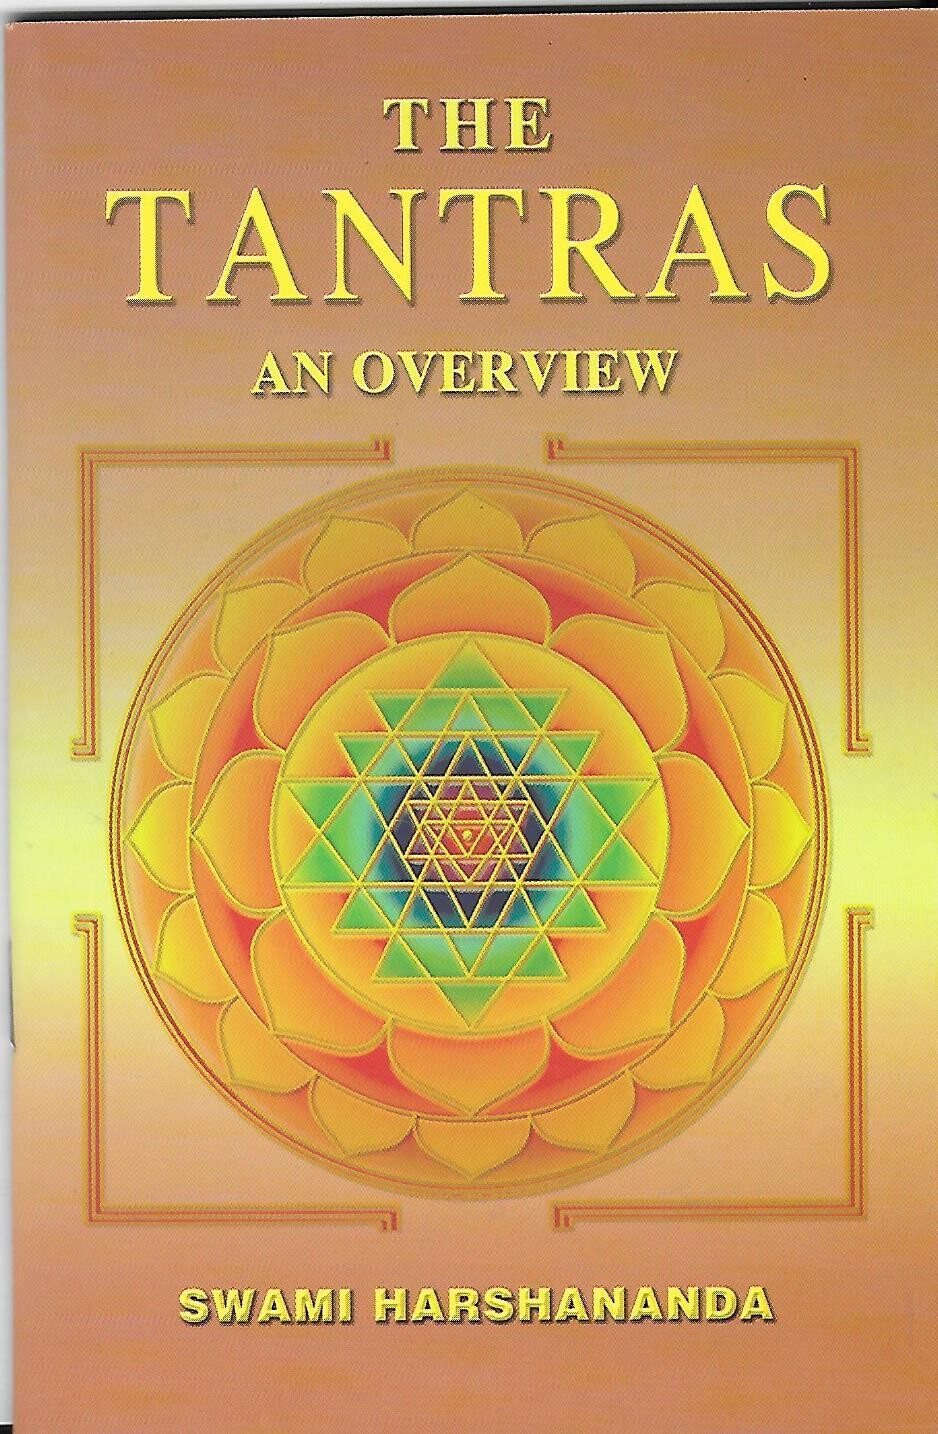 The Tantras